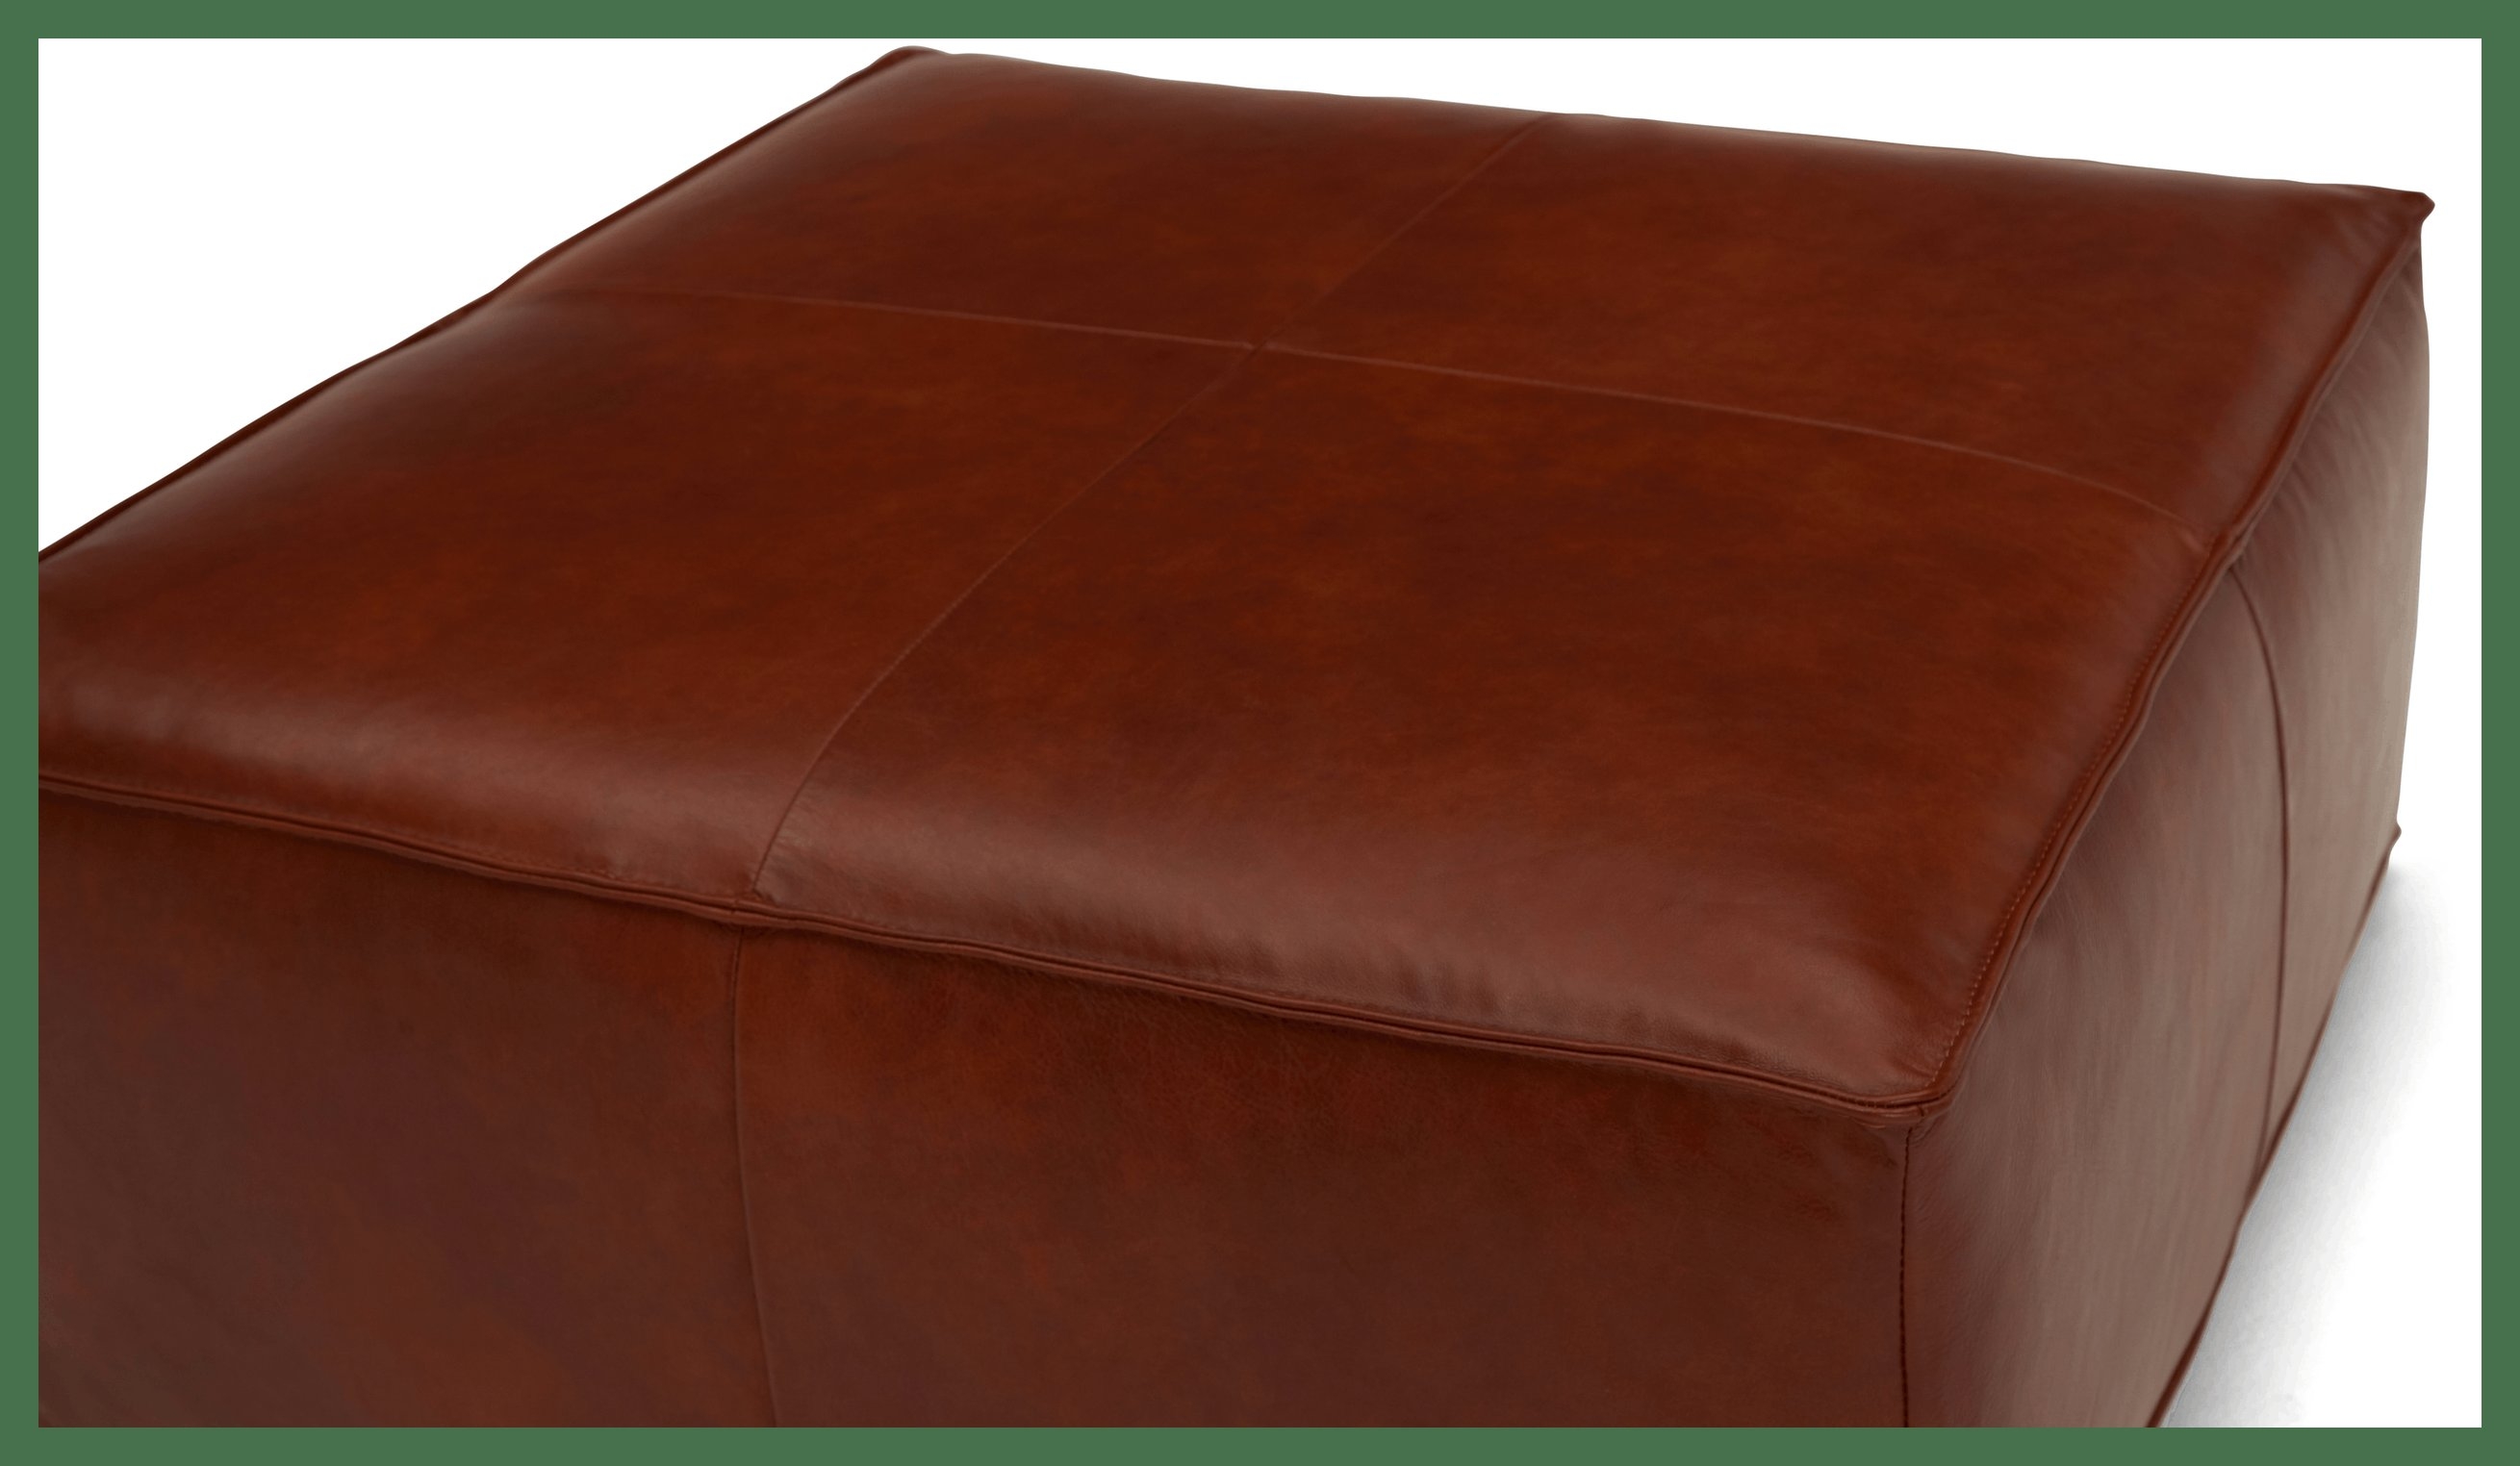 Lyle Mid Century Modern Leather Ottoman - Olympia Camel - Image 3